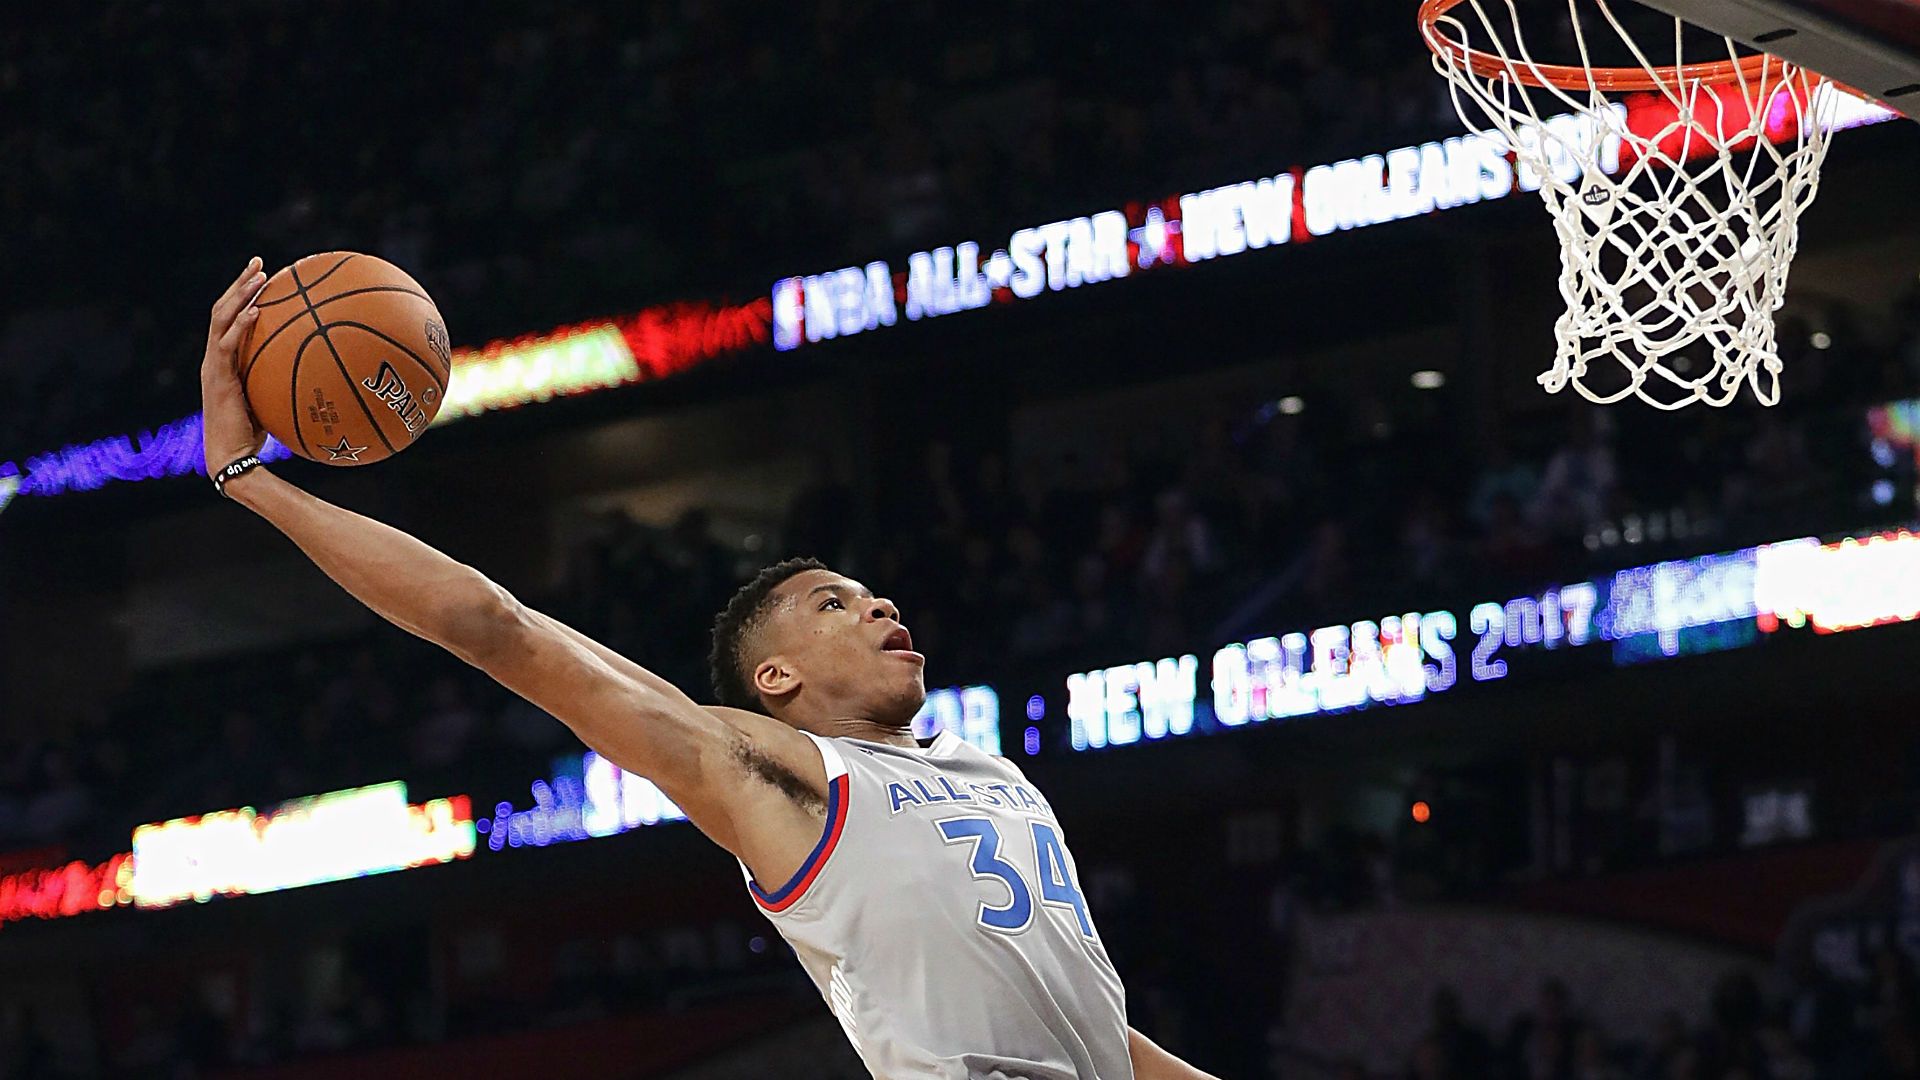 WATCH: Giannis Antetokounmpo kept dunking on Steph Curry. NBA.com Australia. The official site of